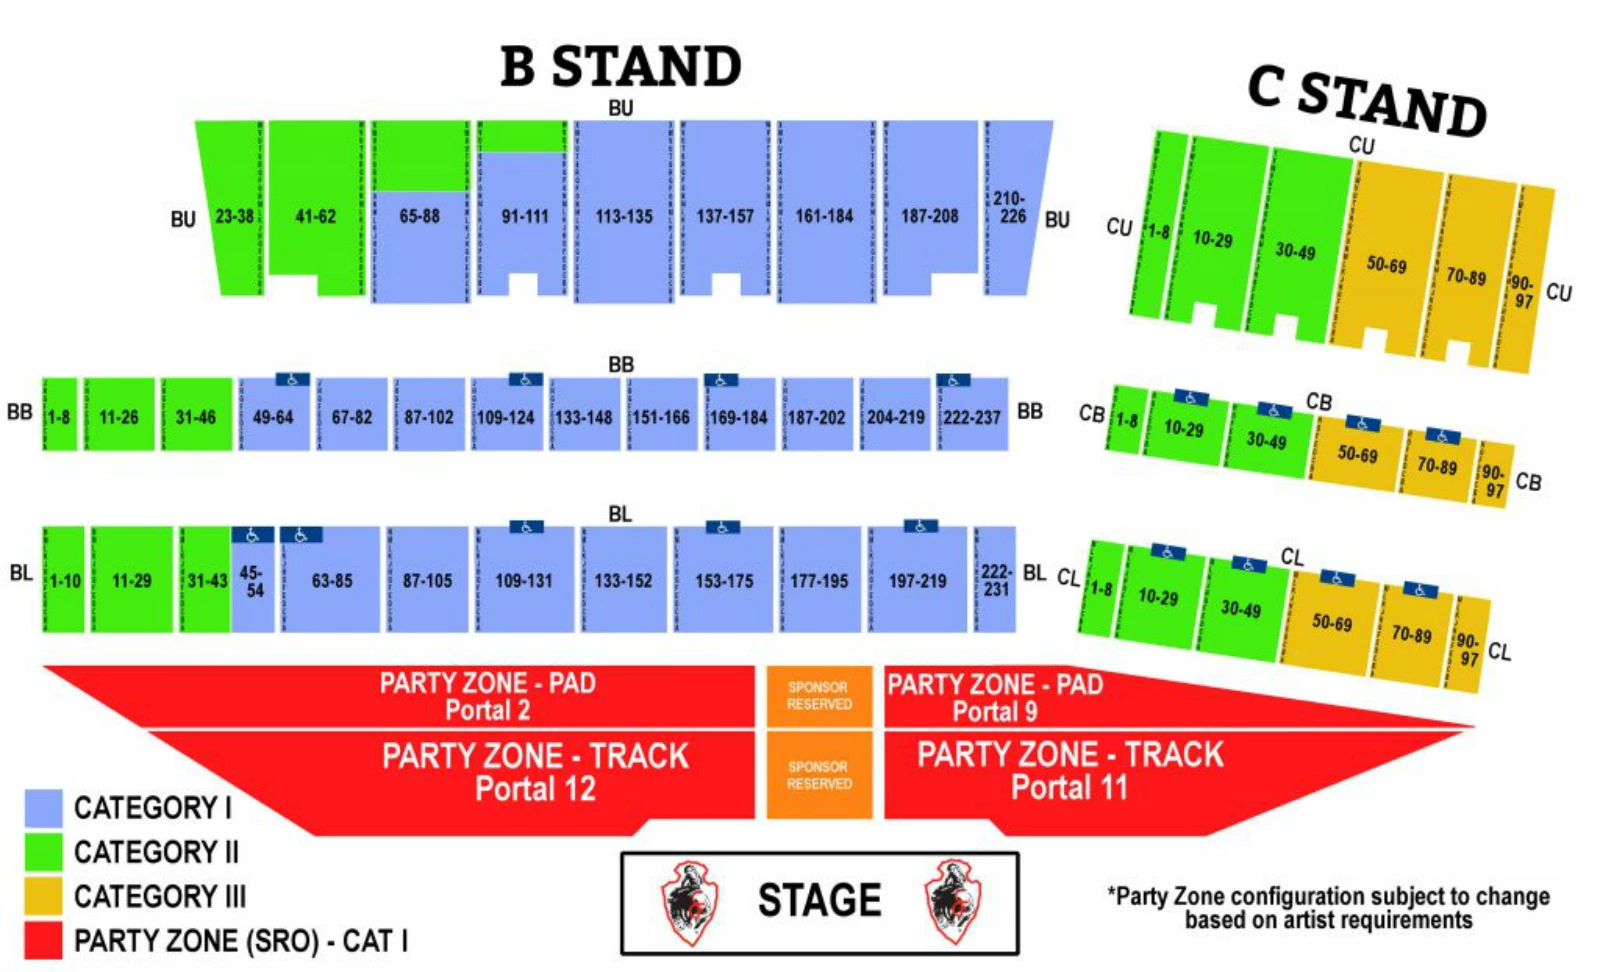 Greeley Independence Stampede Seating Chart